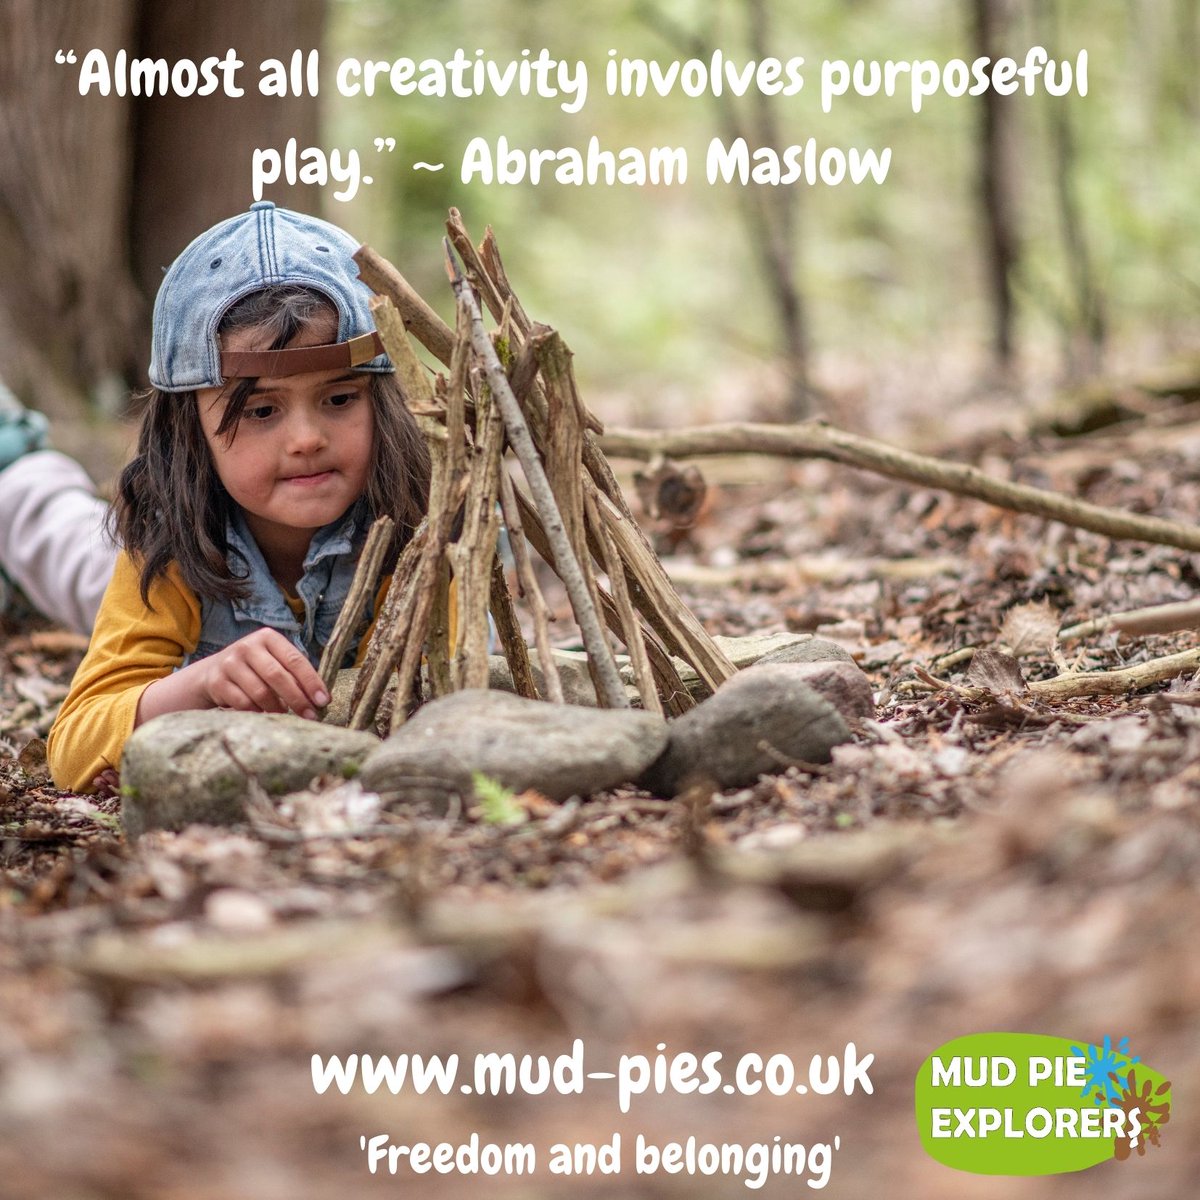 #Maslow's hierarchy of needs is a model for understanding the motivations for human behaviour which we use as the foundation behind our science of Mud Pie Explorer sessions.

#forestschool #mudpieexplorers #bristollife #bristolkids #bristolschools #nature